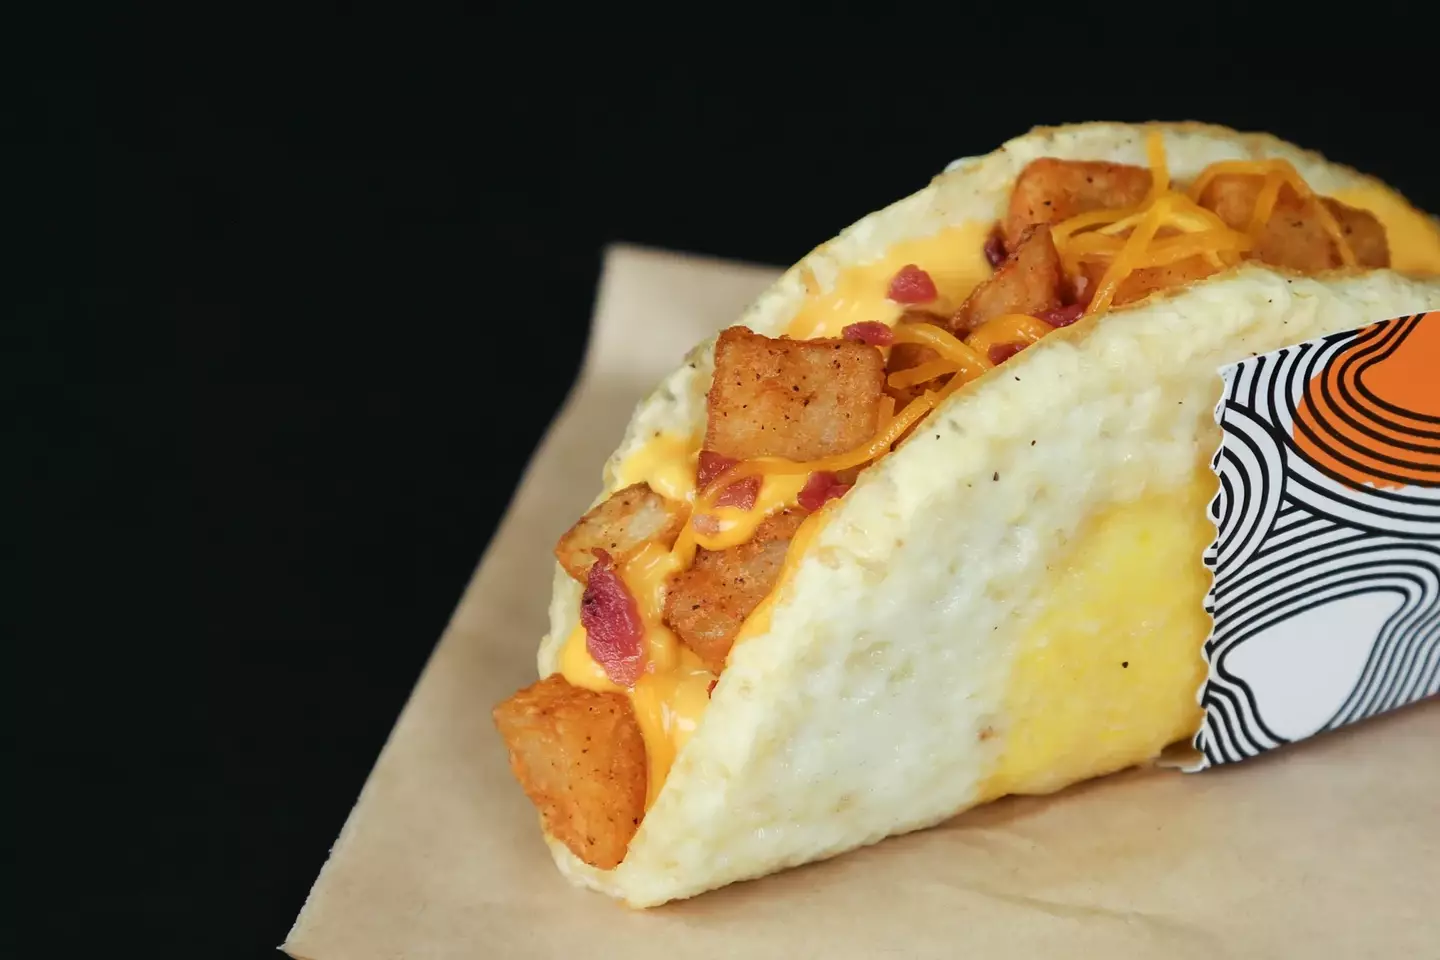 The Naked Egg Taco featured a fried egg as a shell.